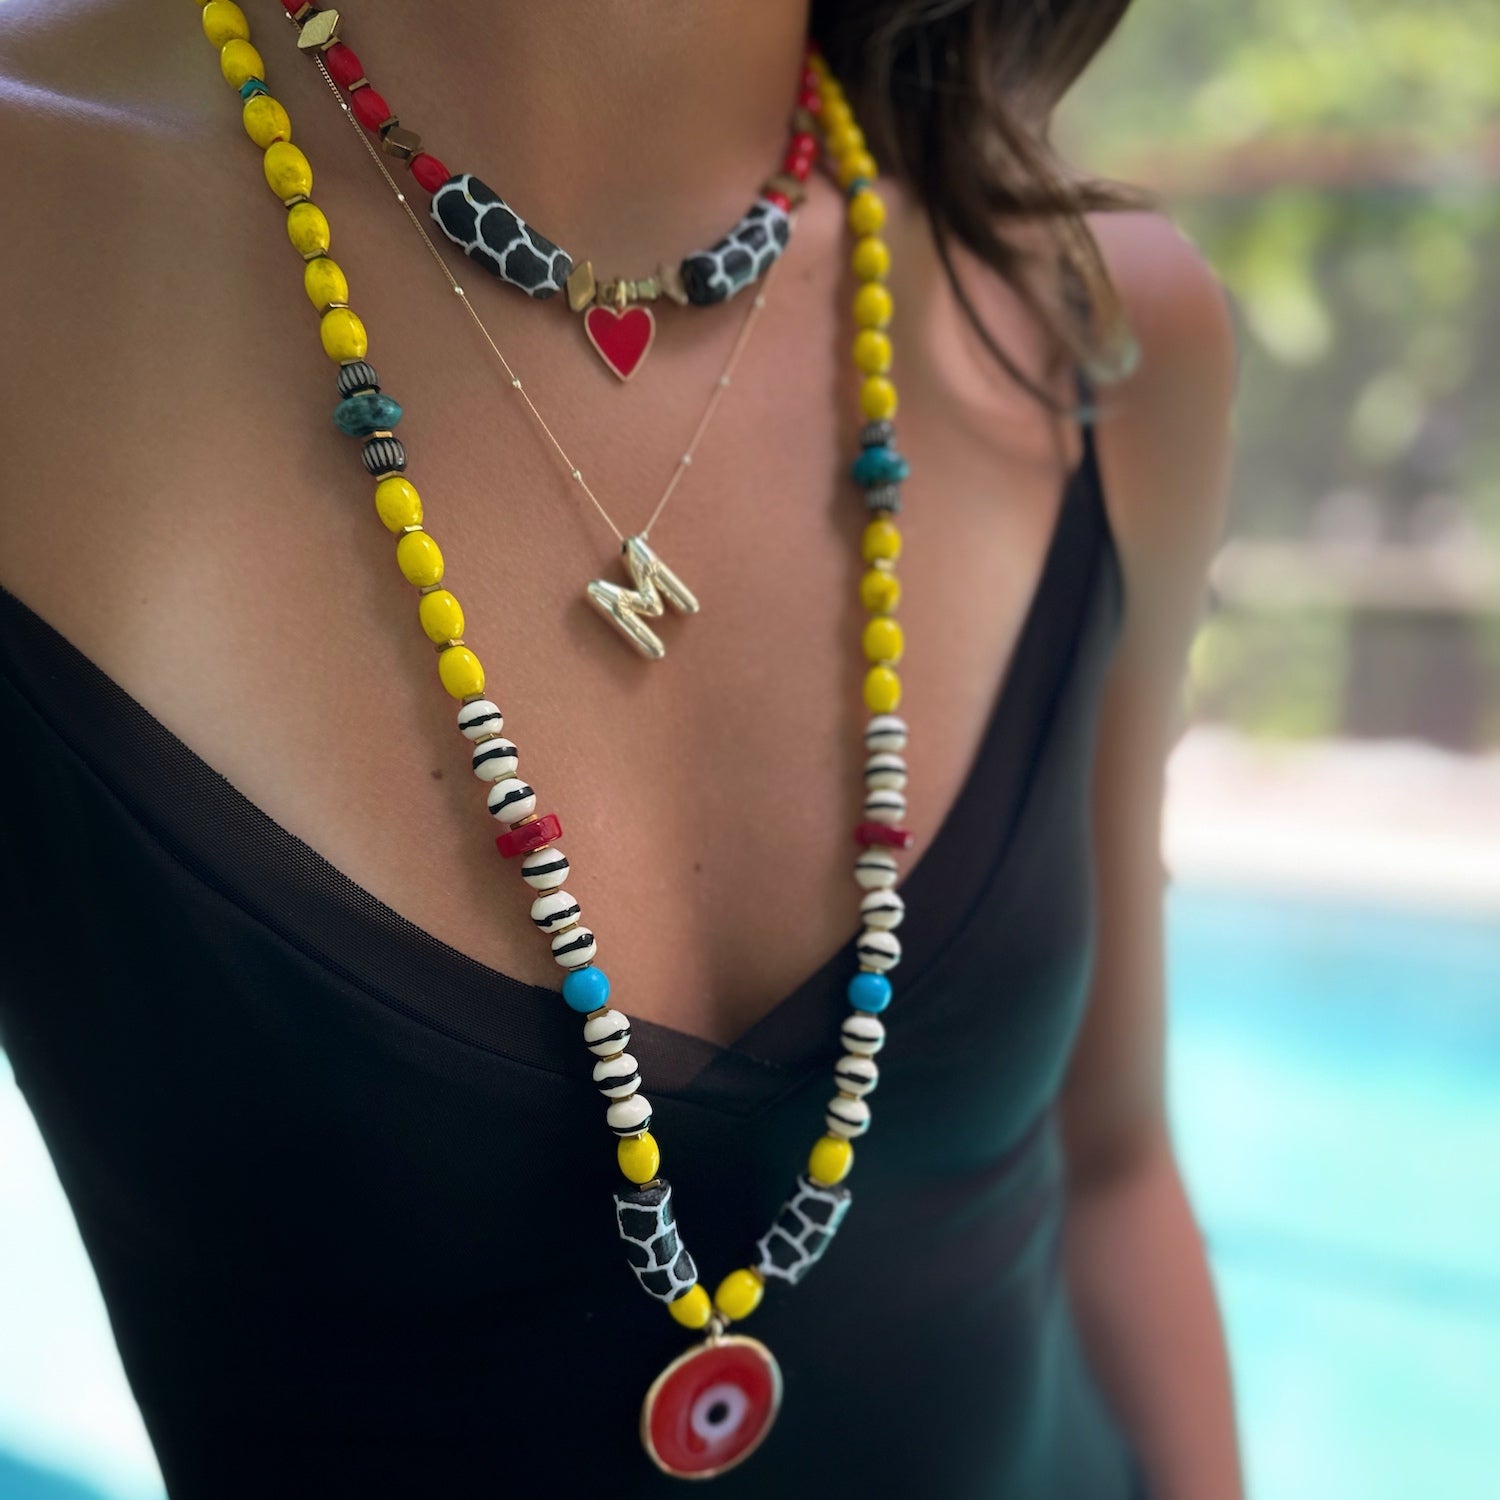 Model showcasing the Nepal yellow beads and turquoise stones on the African Yellow Happiness Necklace.